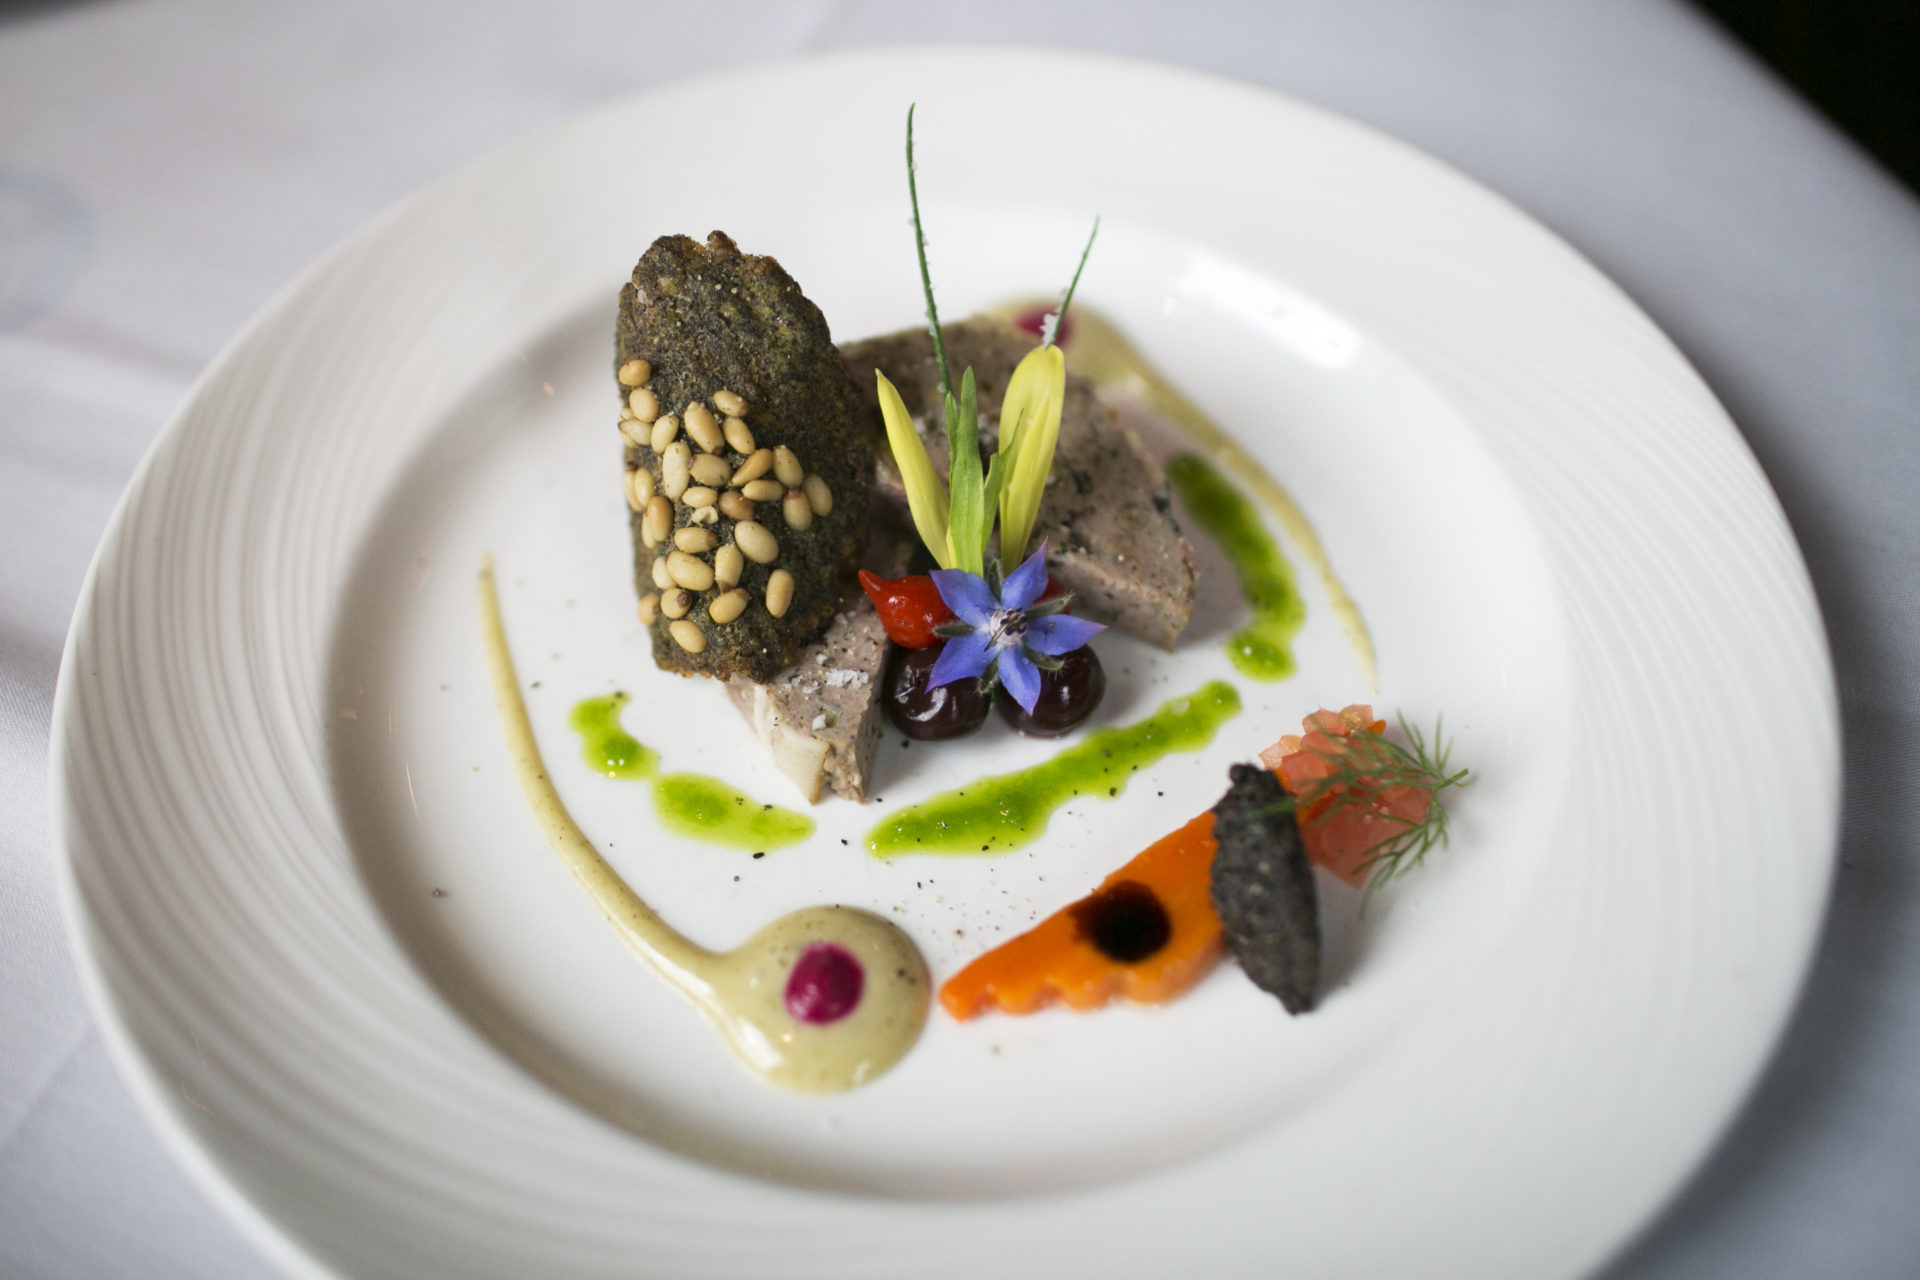 Venison Terrine with Green Lentil, Pine Nut, Tuile, Griotine, Carrot Pirogue, and Provence Artichoke Vinaigrette at the Refectory in Columbus, OH on October 10, 2016.